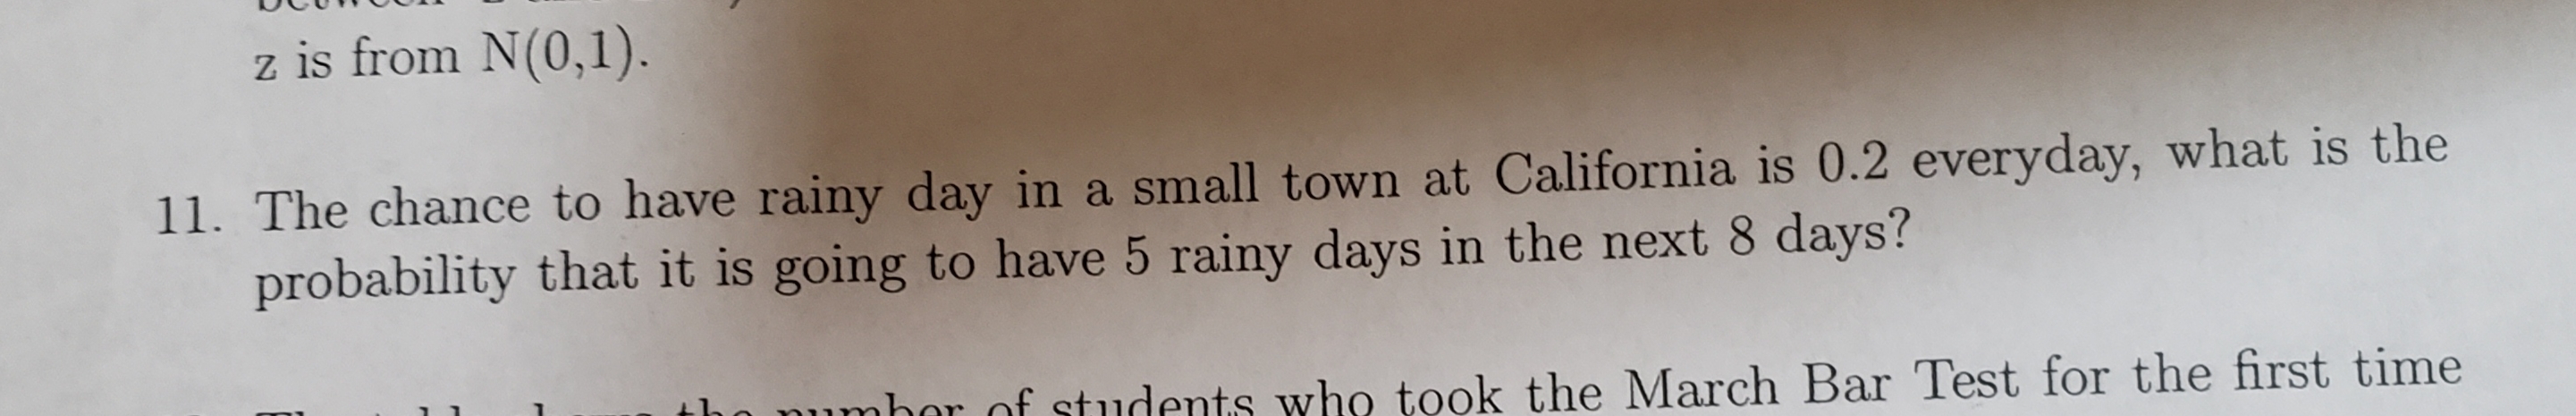 z is from N(0,1).
11. The chance to have rainy day in a small town at California is 0.2 everyday, what is the
probability that it is going to have 5 rainy days in the next 8 days?
bor of students who took the March Bar Test for the first time
